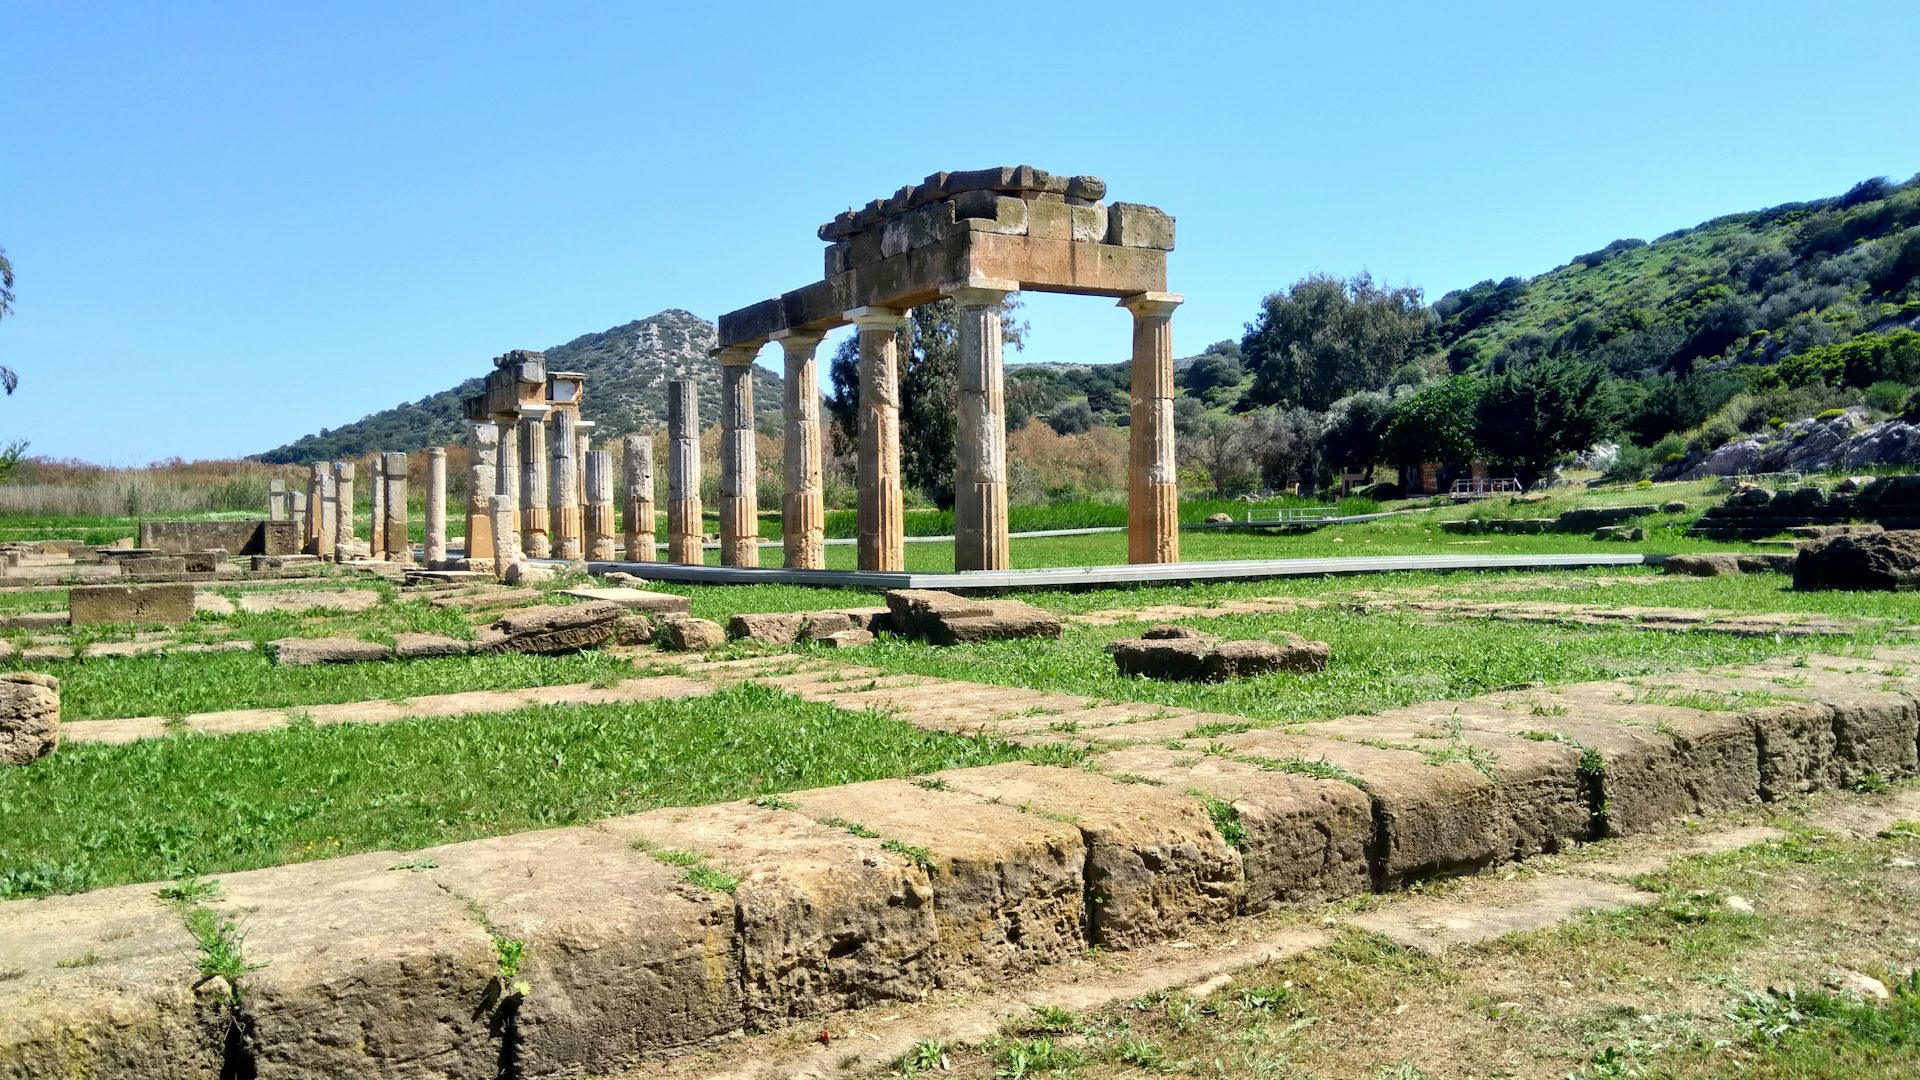 Remains of the Temple of Artemis at Brauron